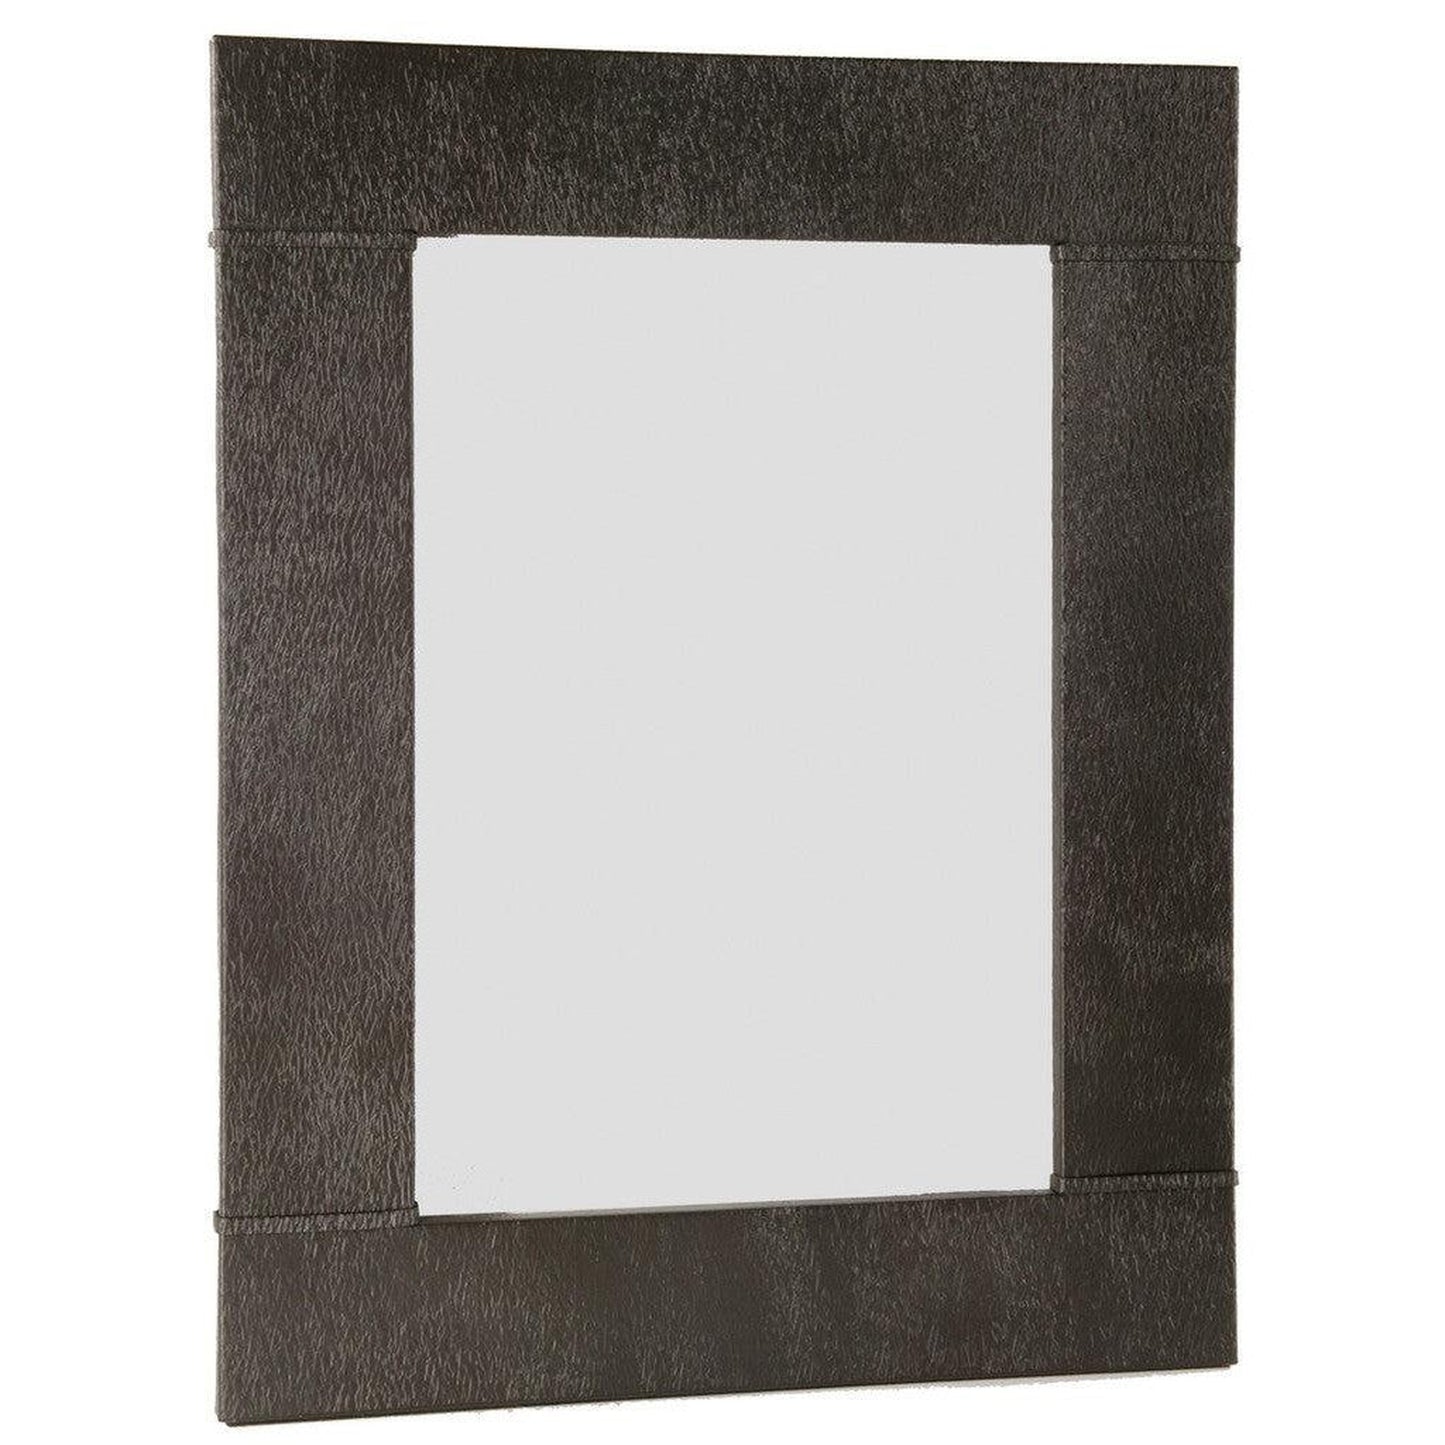 Stone County Ironworks Cedarvale 31" x 35" Small Chalk White Iron Wall Mirror With Gold Iron Accent